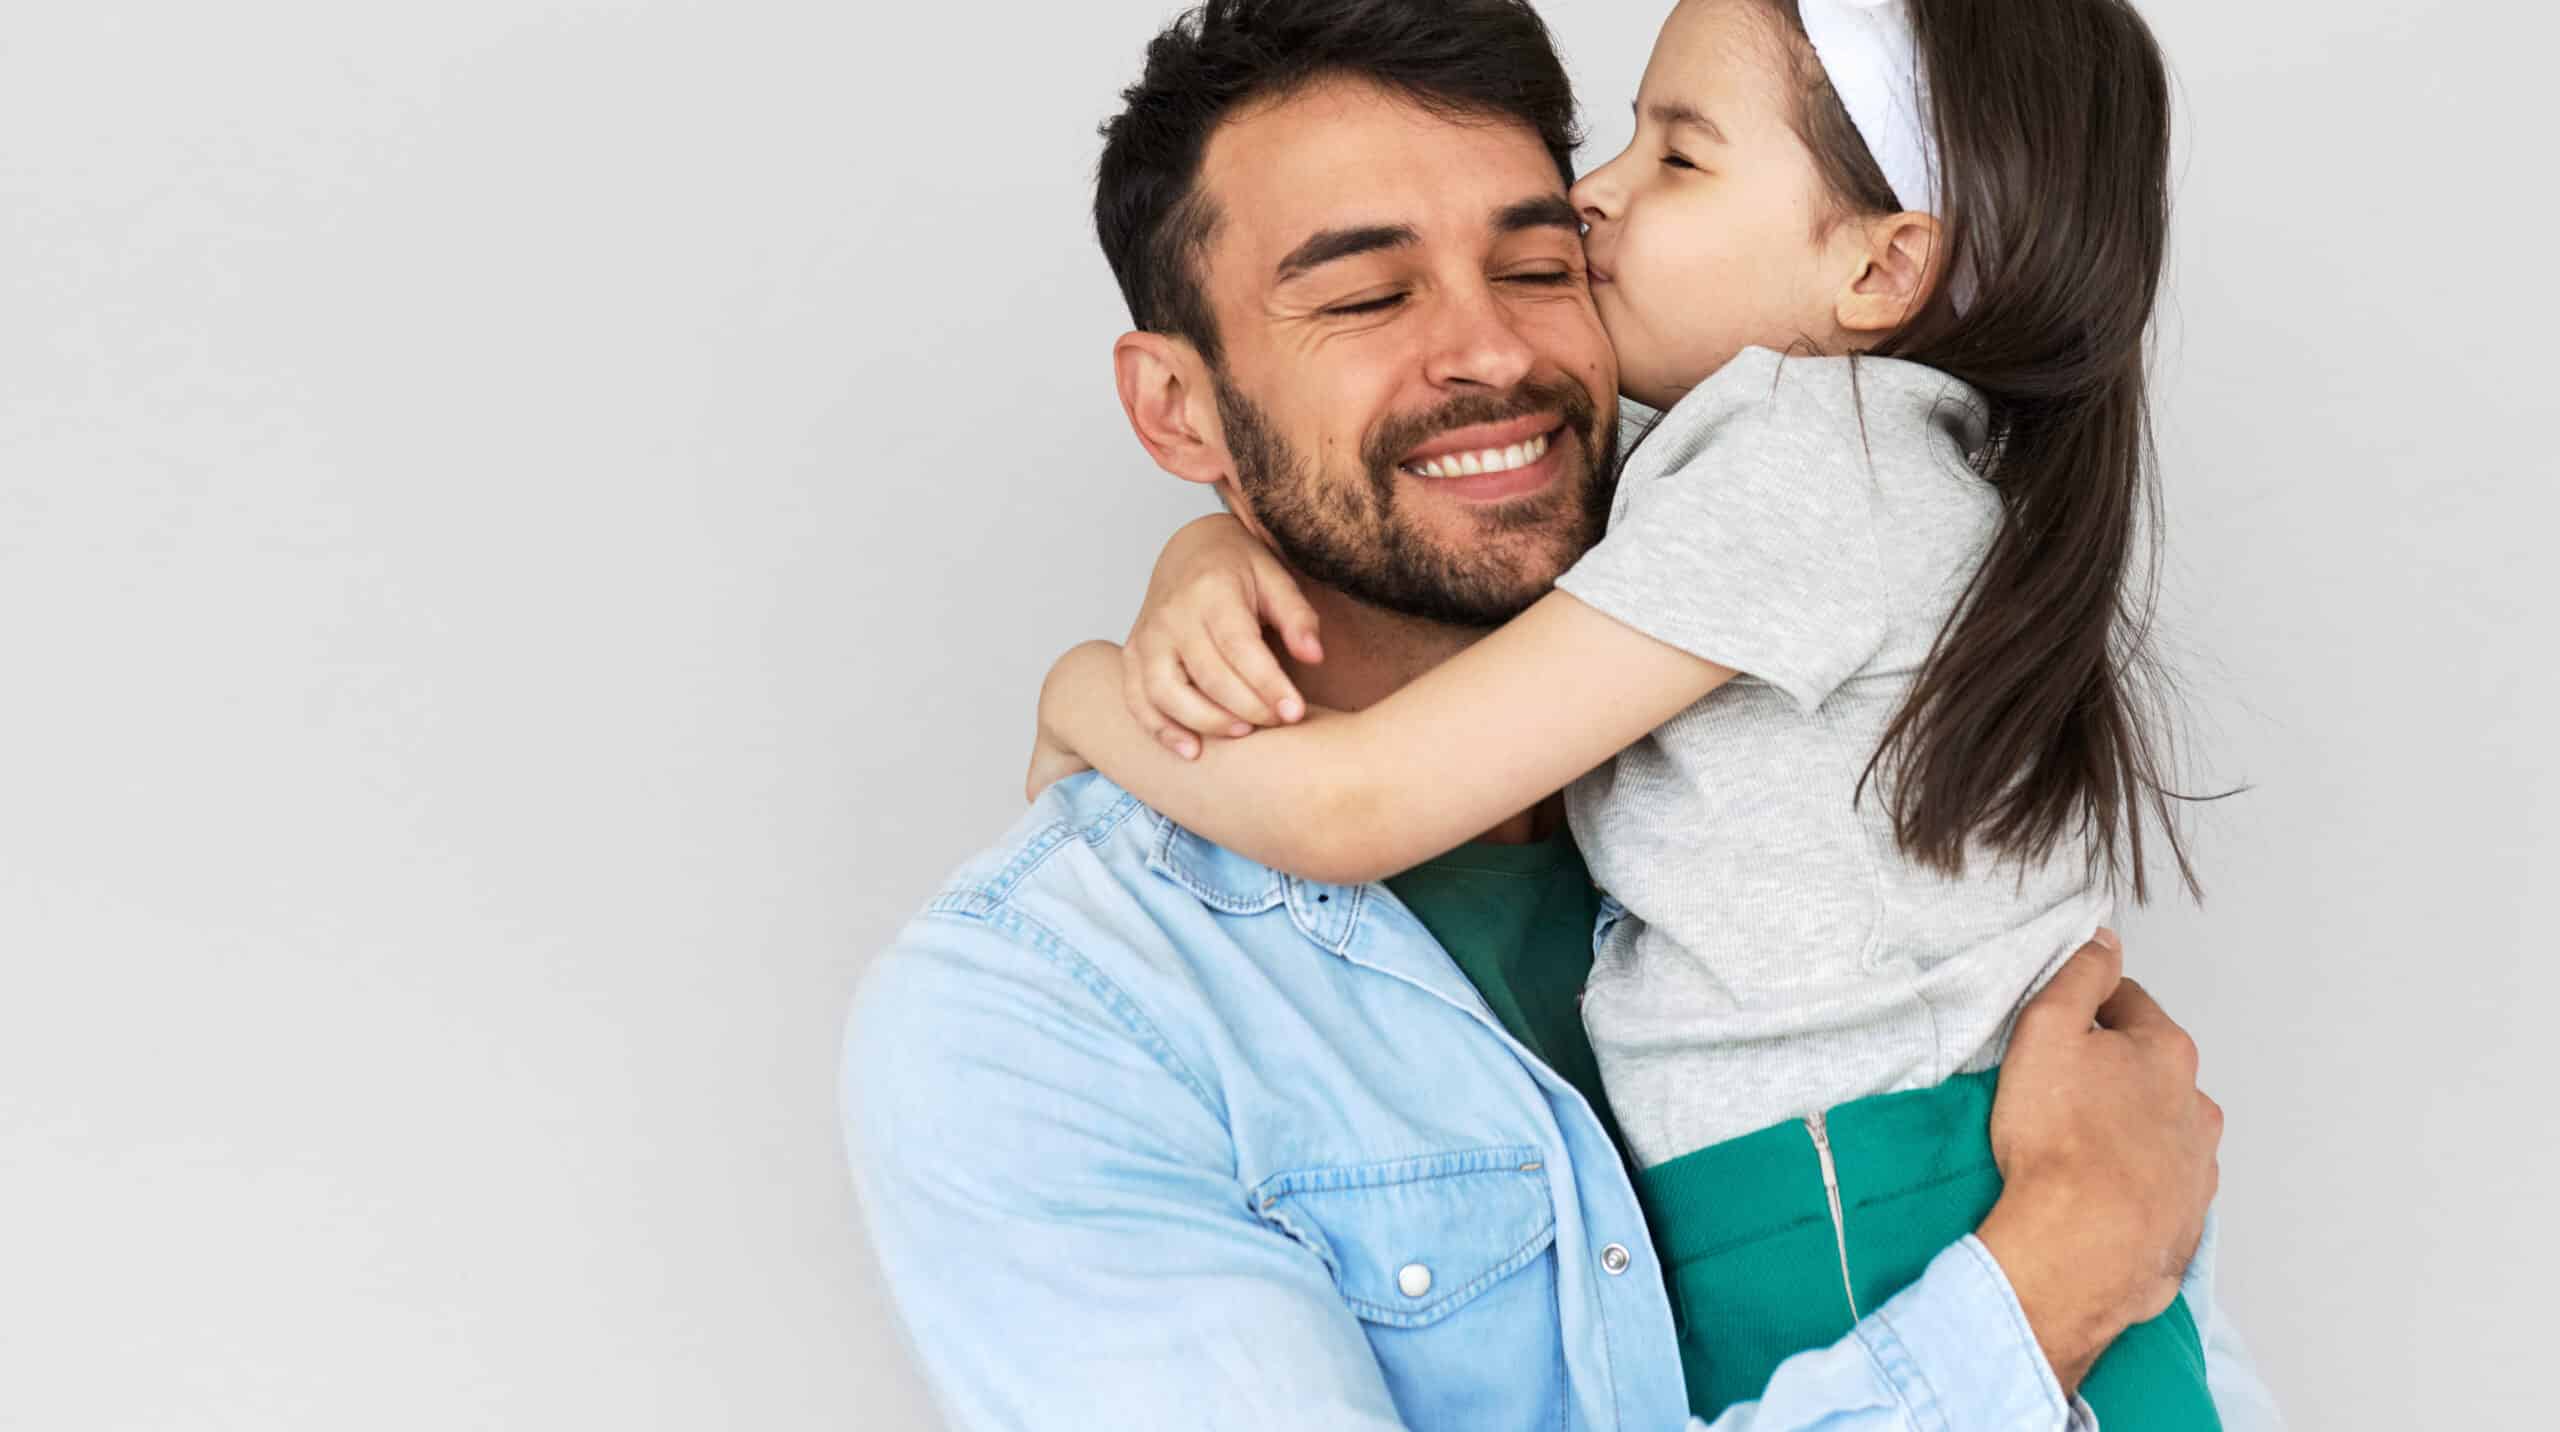 Indoor image of happy father smiling broadly hold embrace his cute daughter kissing on the cheek. Loving daddy and his little girl cuddling and enjoying time together. Childhood and fatherhood concept